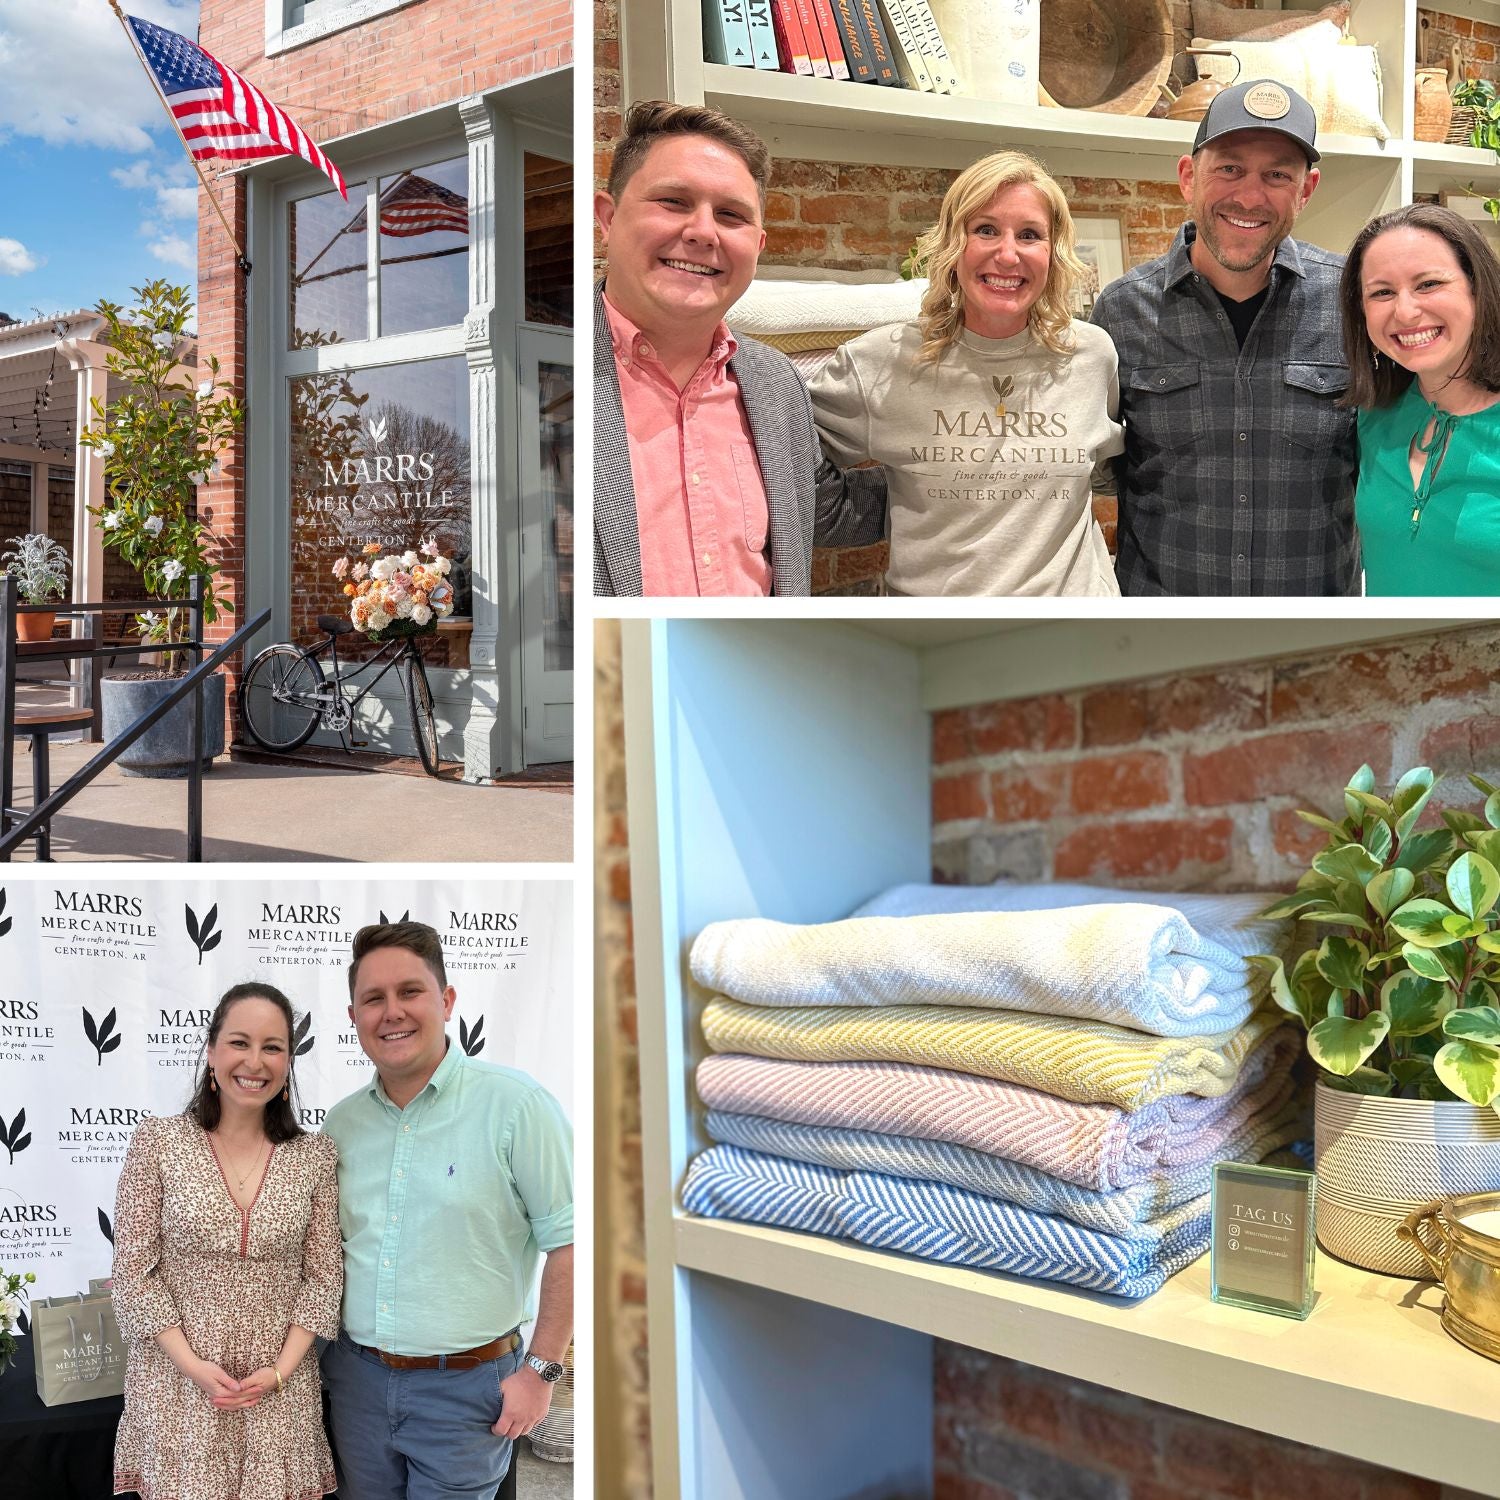 Image collage of the grand opening of Marrs Mercantile in Centerton, Arkansas. Authenticity50 team members, Steph & Deagan with HGTV stars Jenny & Dave Marrs. Authenticity50 Heritage Blankets on a shelf at Marrs Mercantile. A picture of the front of the store. A picture of Steph and Deagan in front of the store.